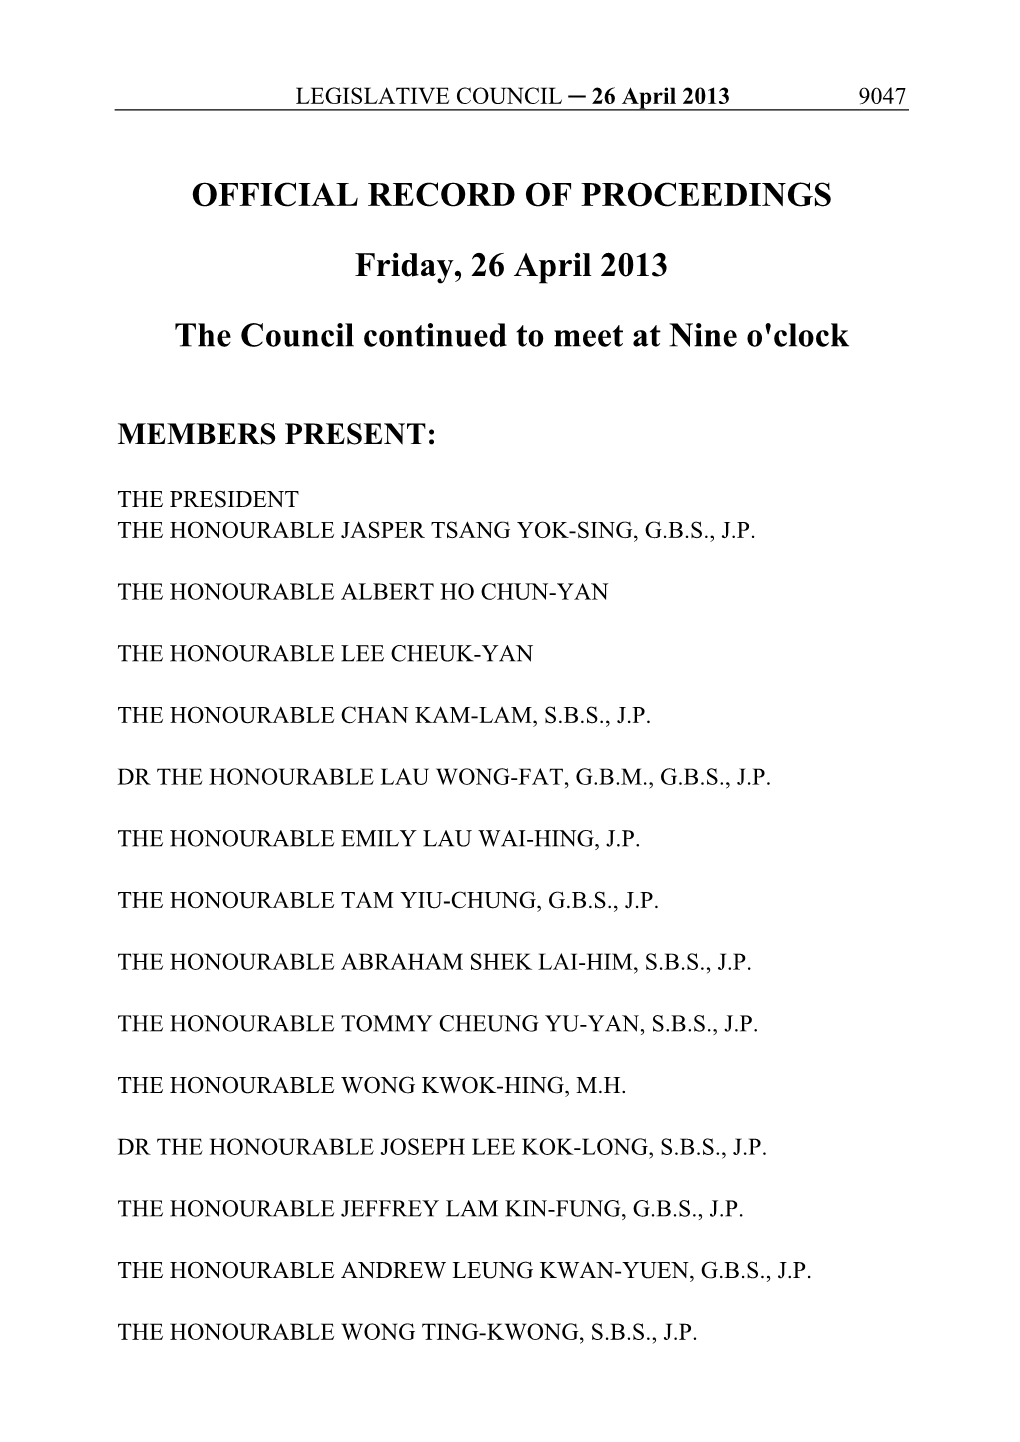 OFFICIAL RECORD of PROCEEDINGS Friday, 26 April